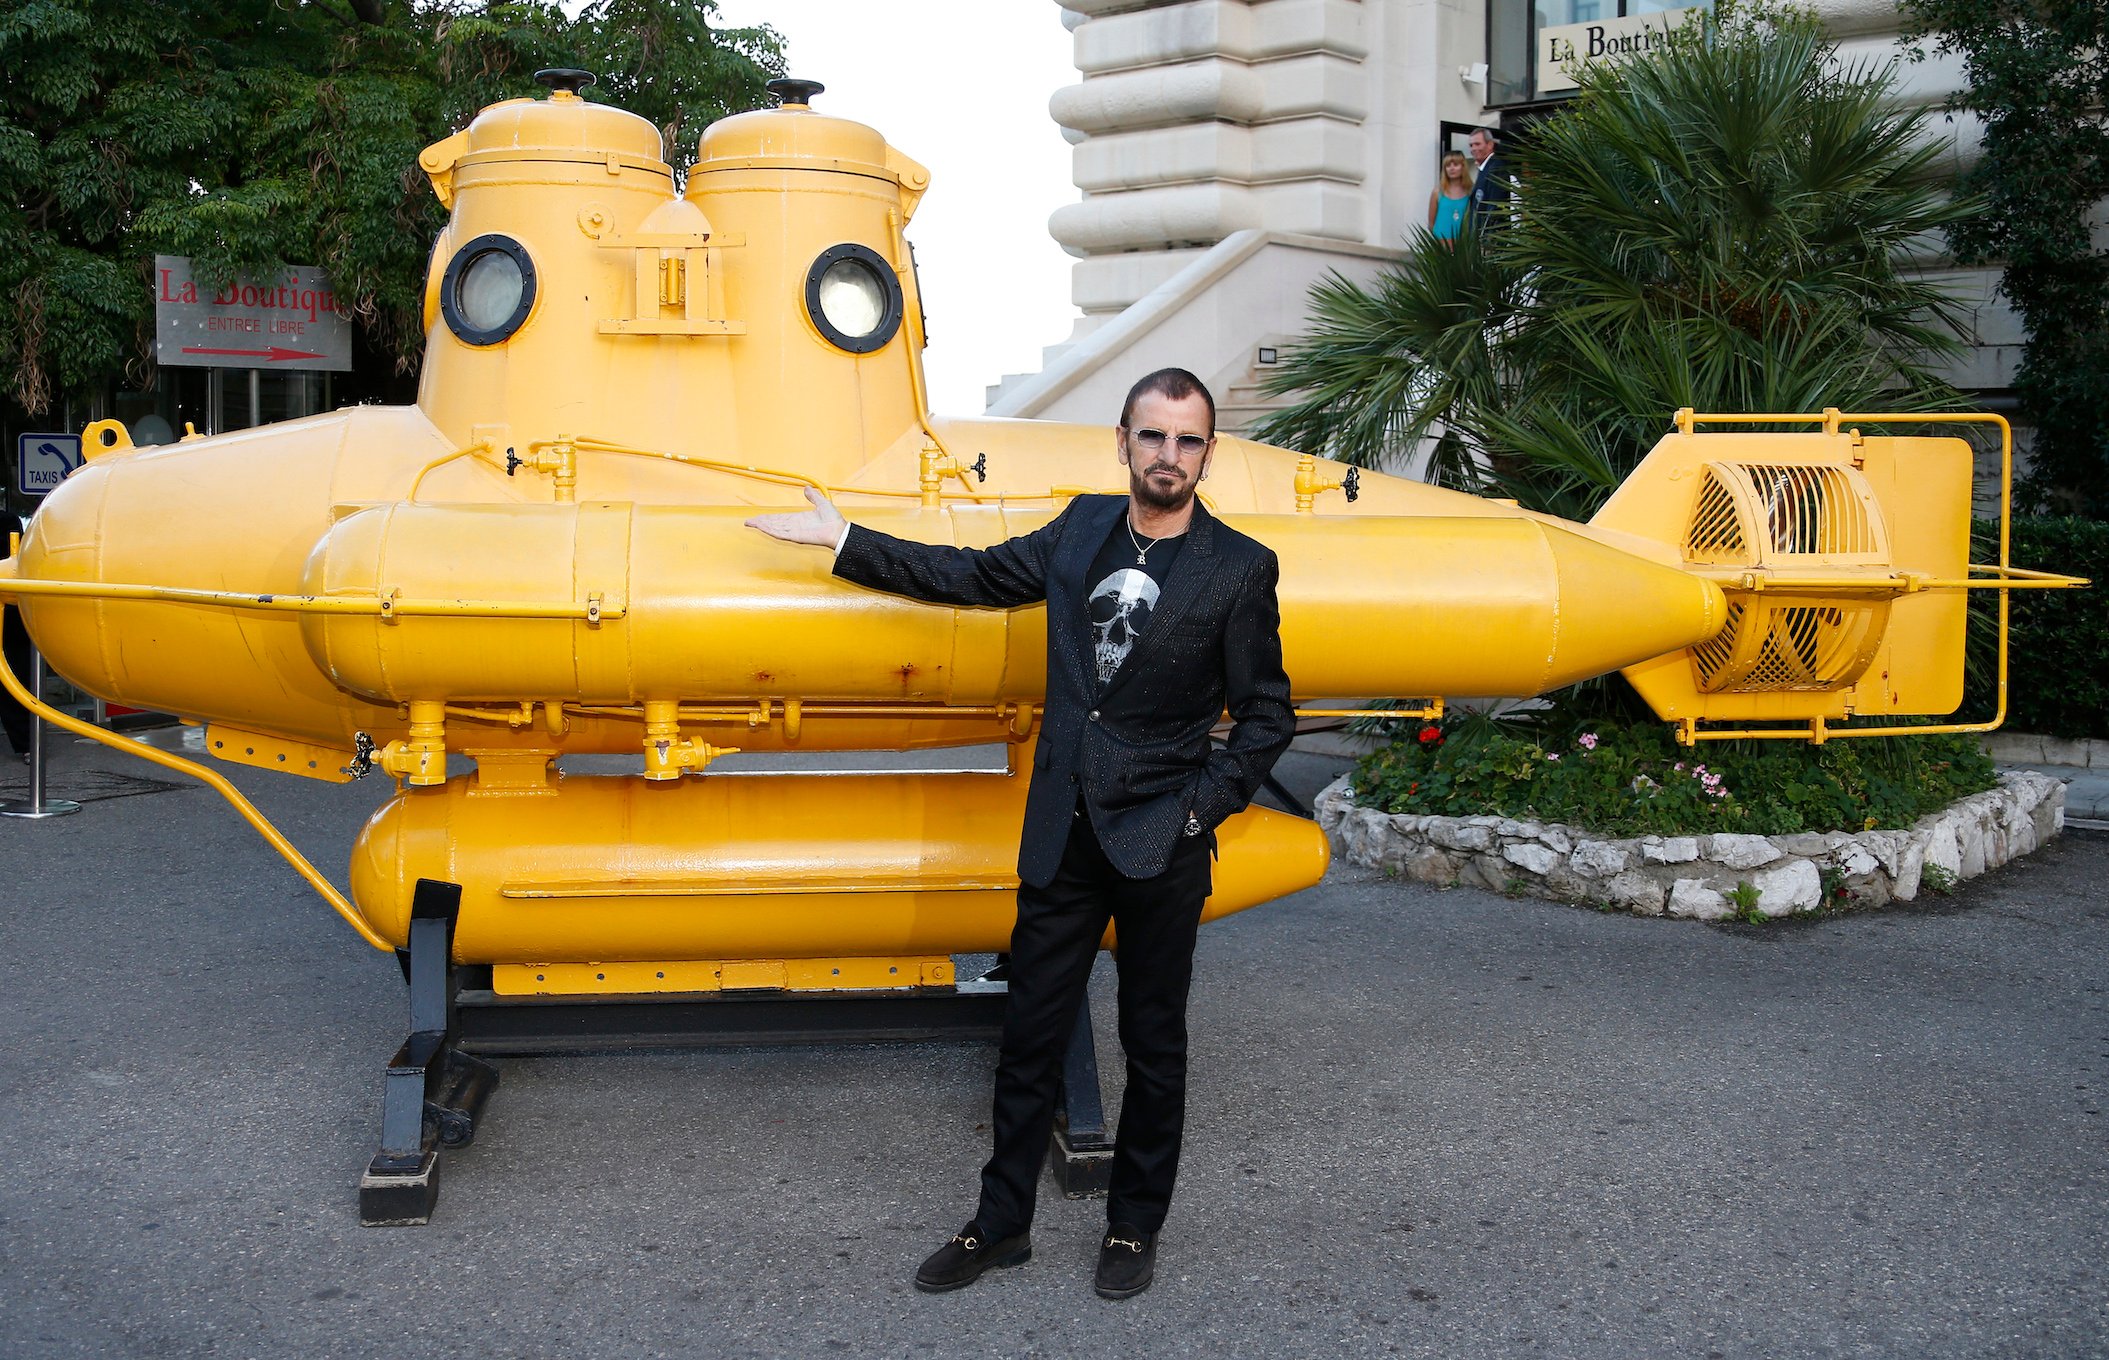 Ringo Starr poses in front of a yellow submarine at the Oceanographic Museum in Monaco